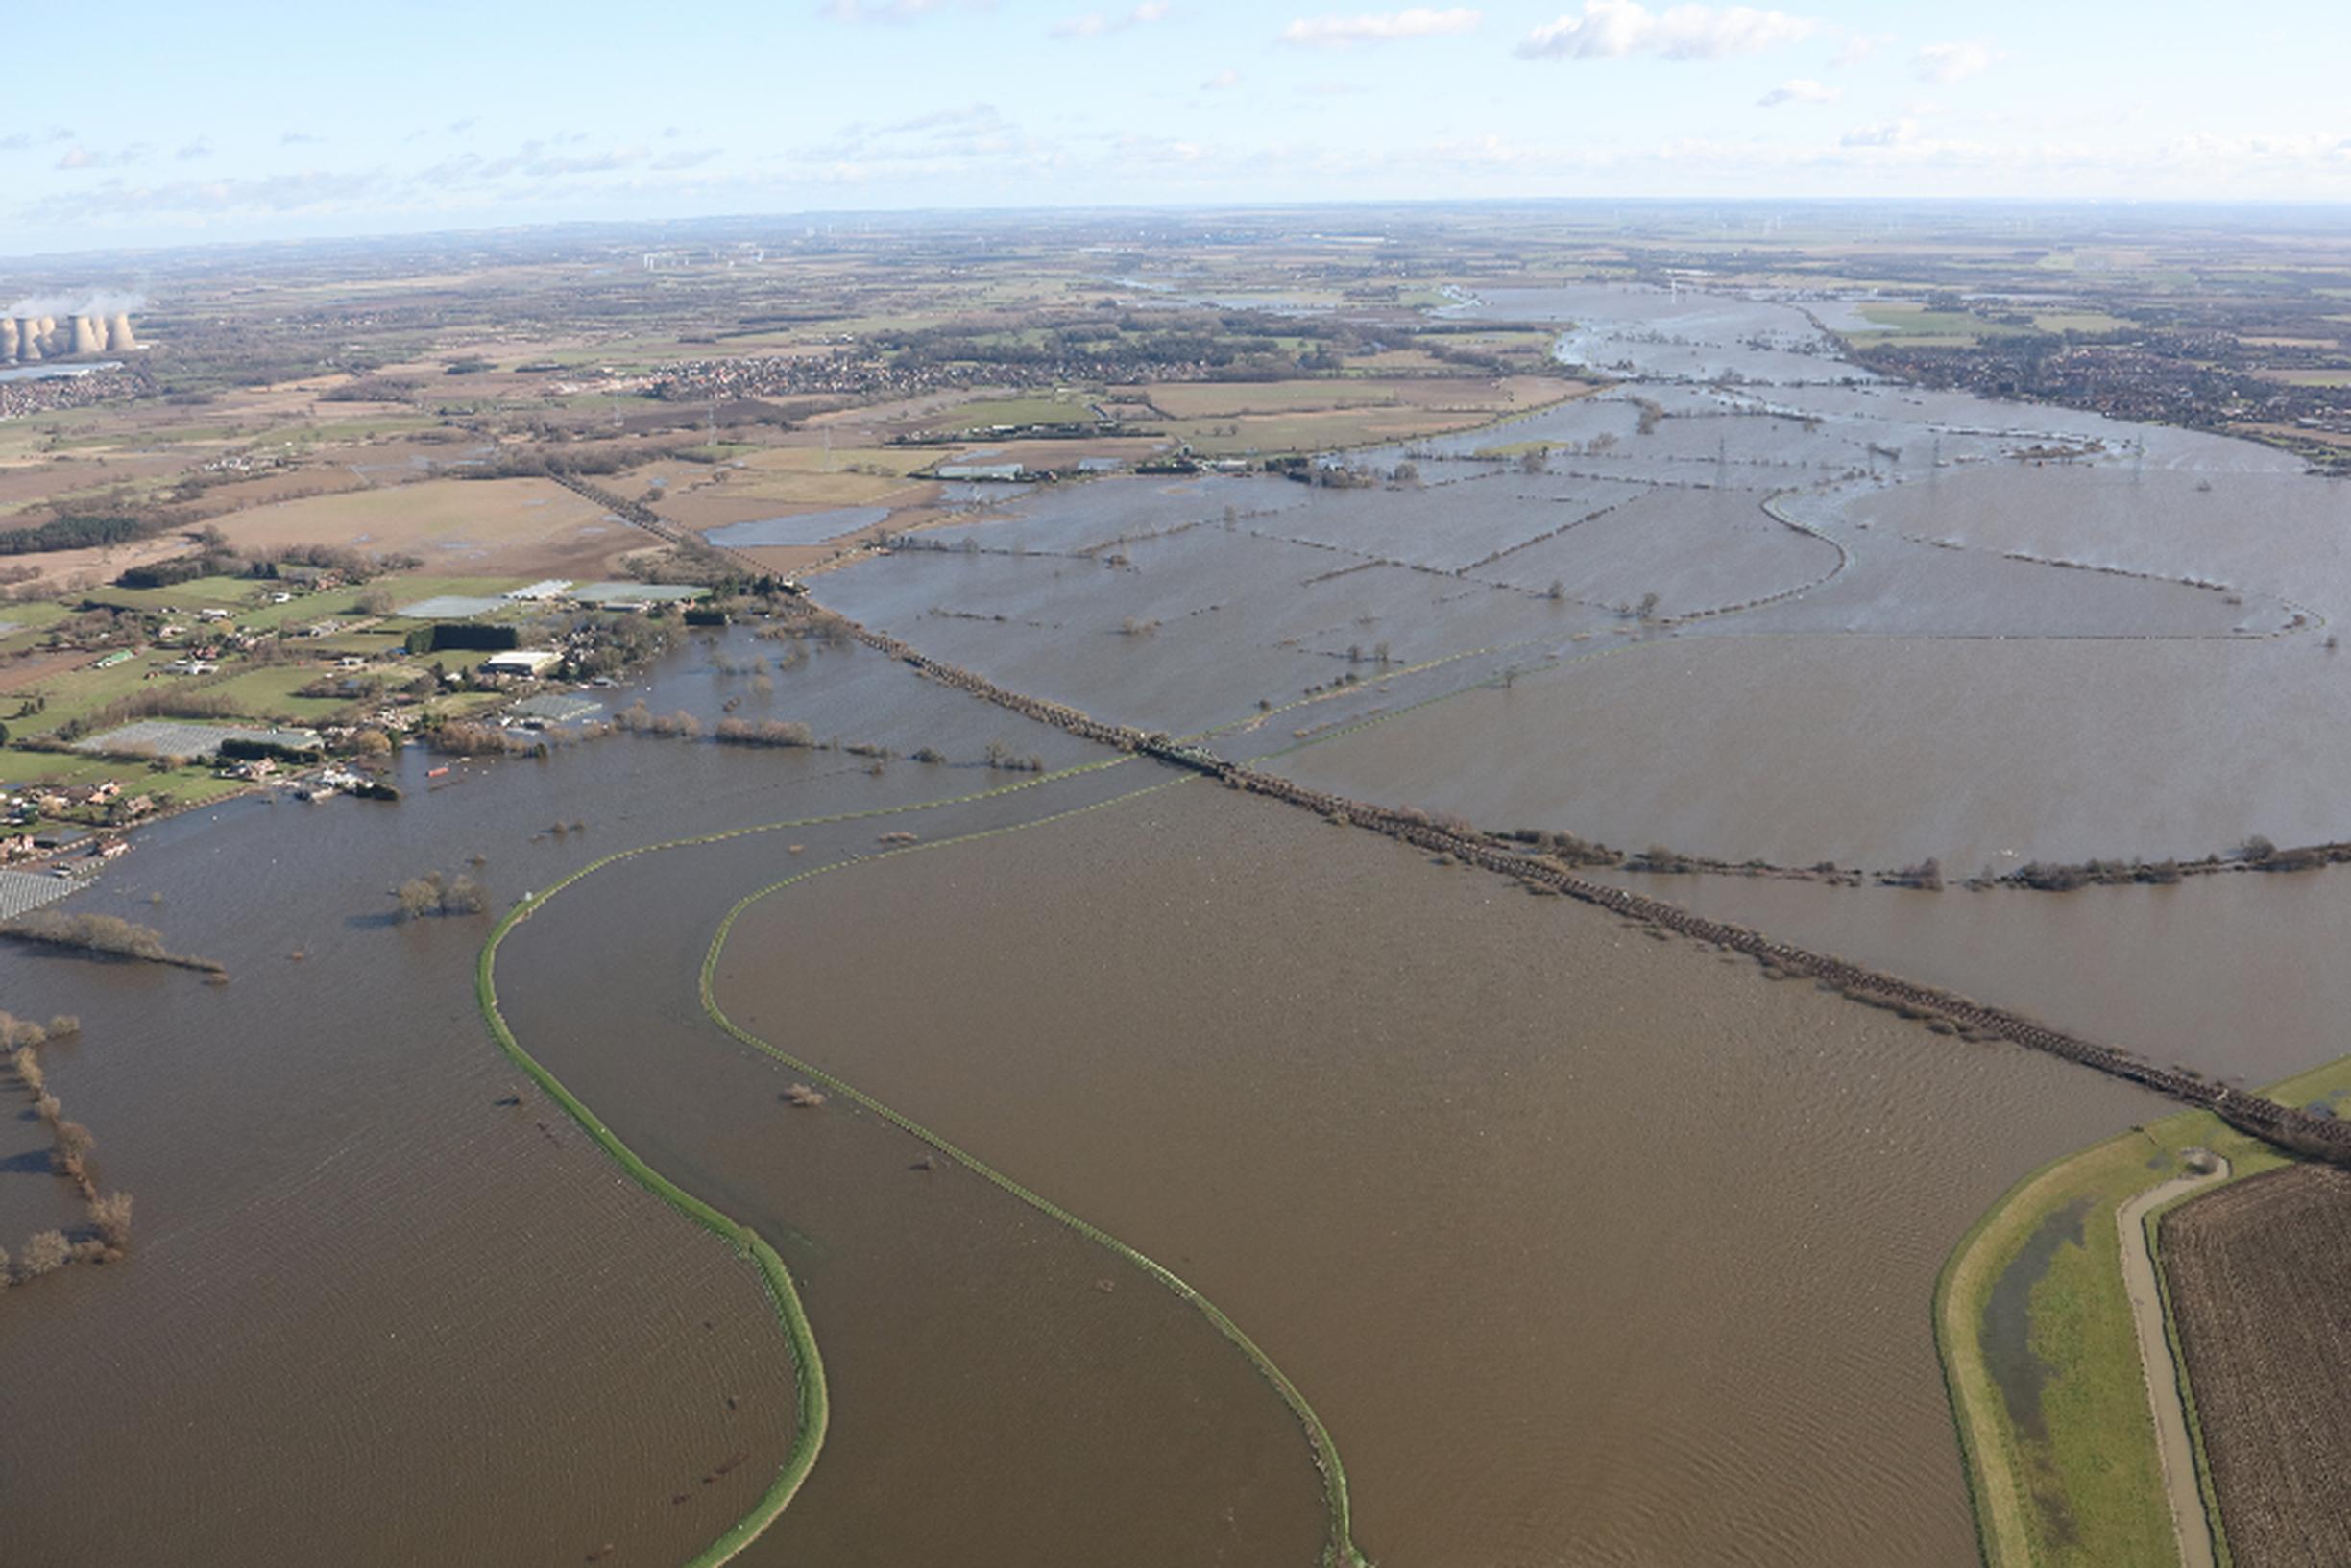 Rail line flooded near the Drax power station in North Yorkshire